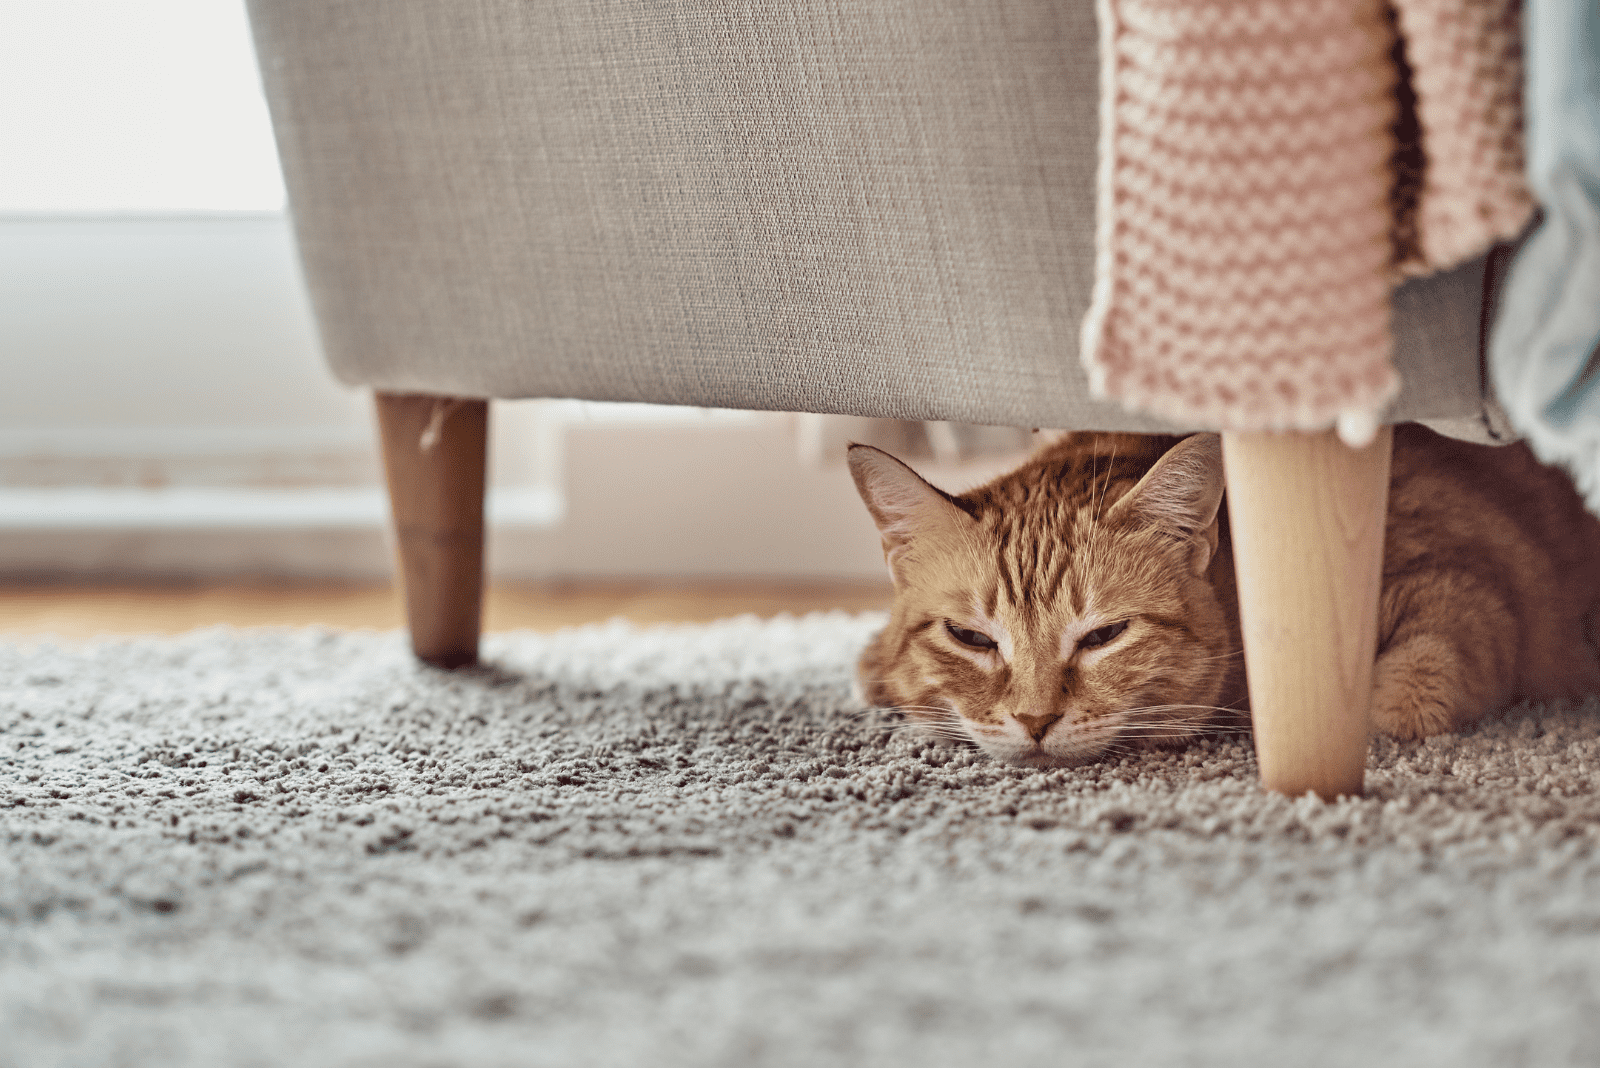 the cat hides under the armchair